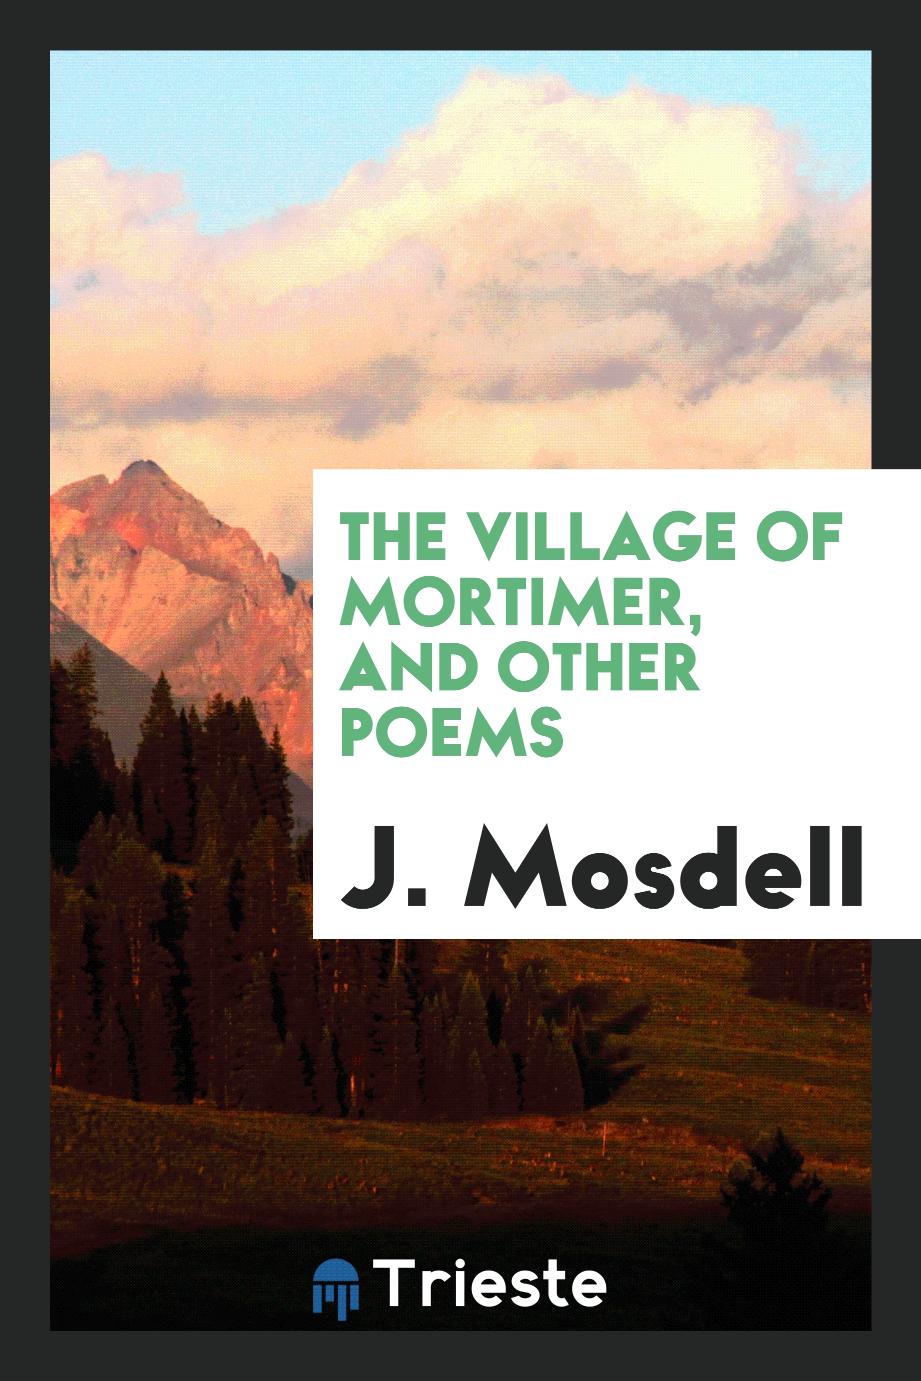 The village of Mortimer, and other poems